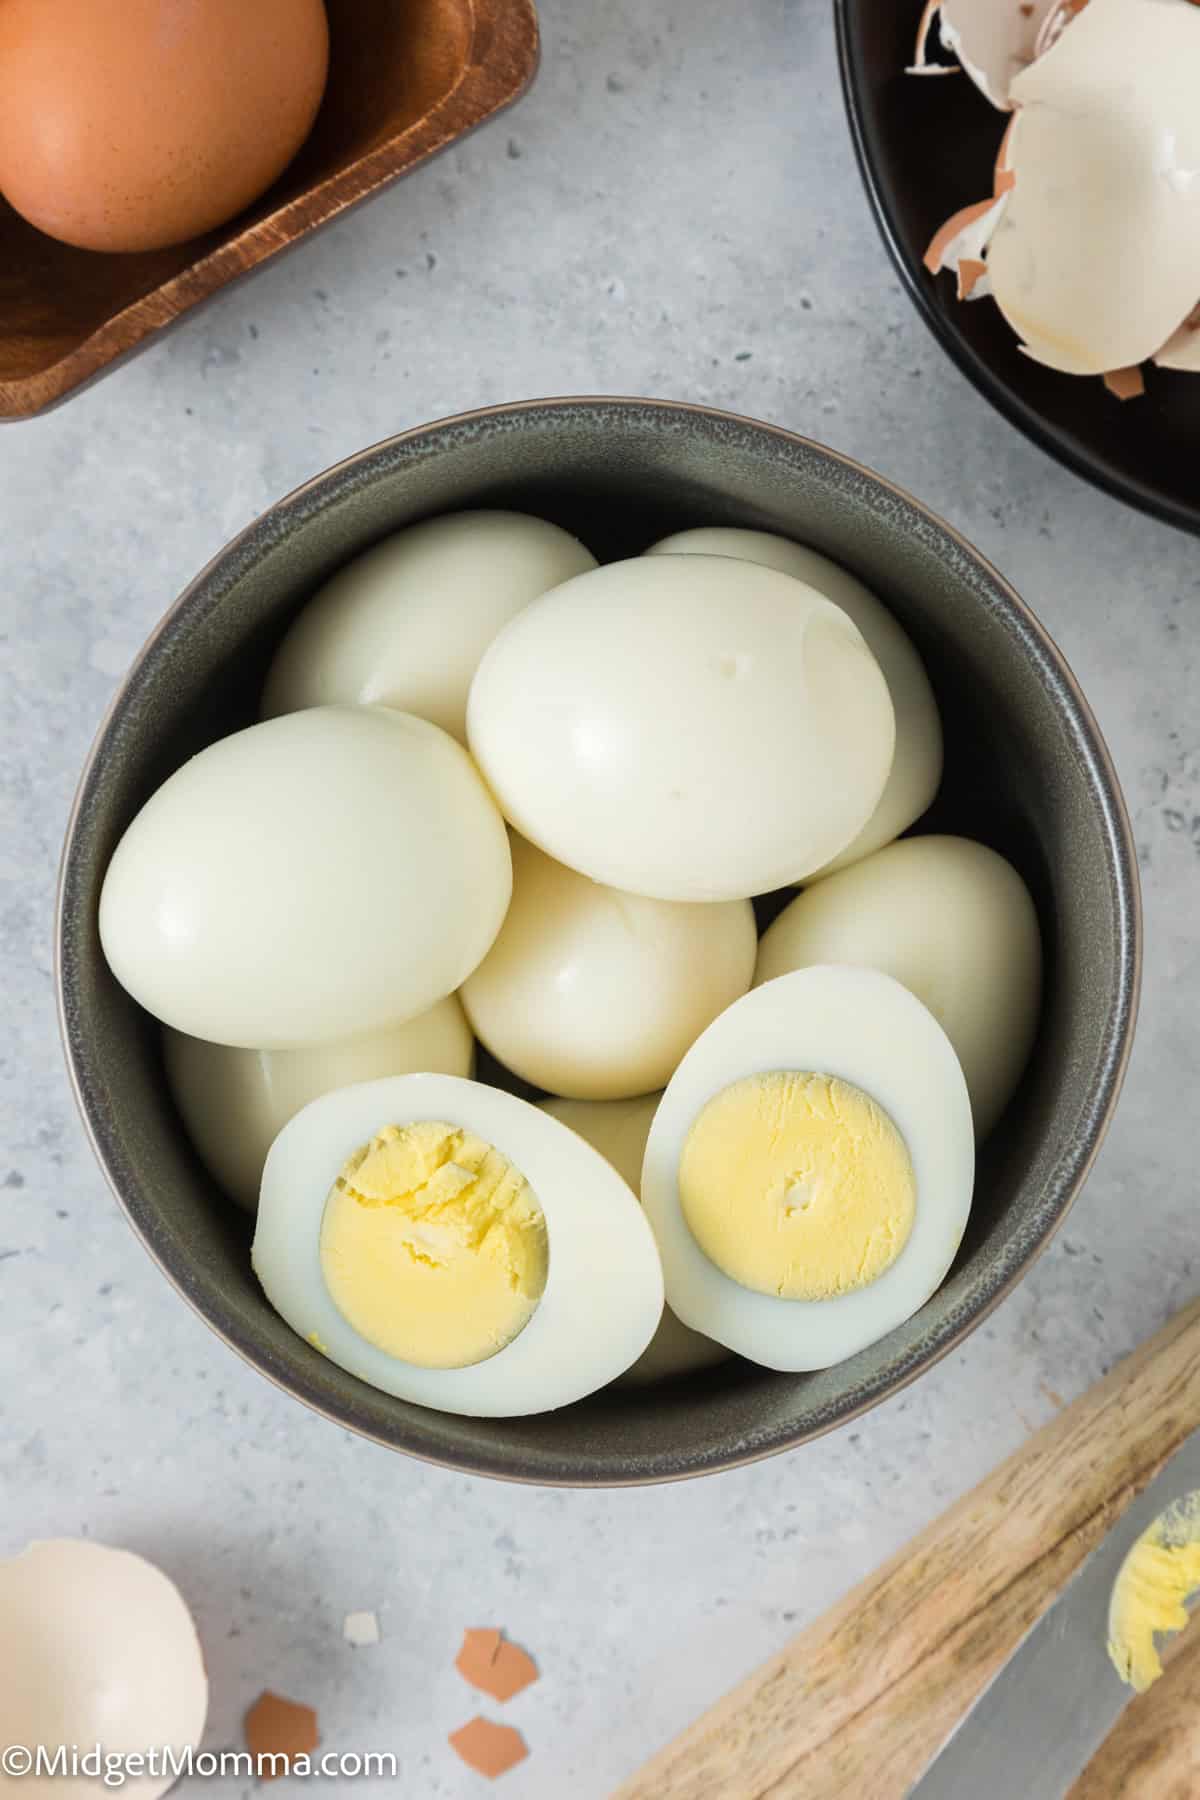 A bowl of hard-boiled eggs, some whole and one cut in half, showing the solid yellow yolk, placed on a light surface.